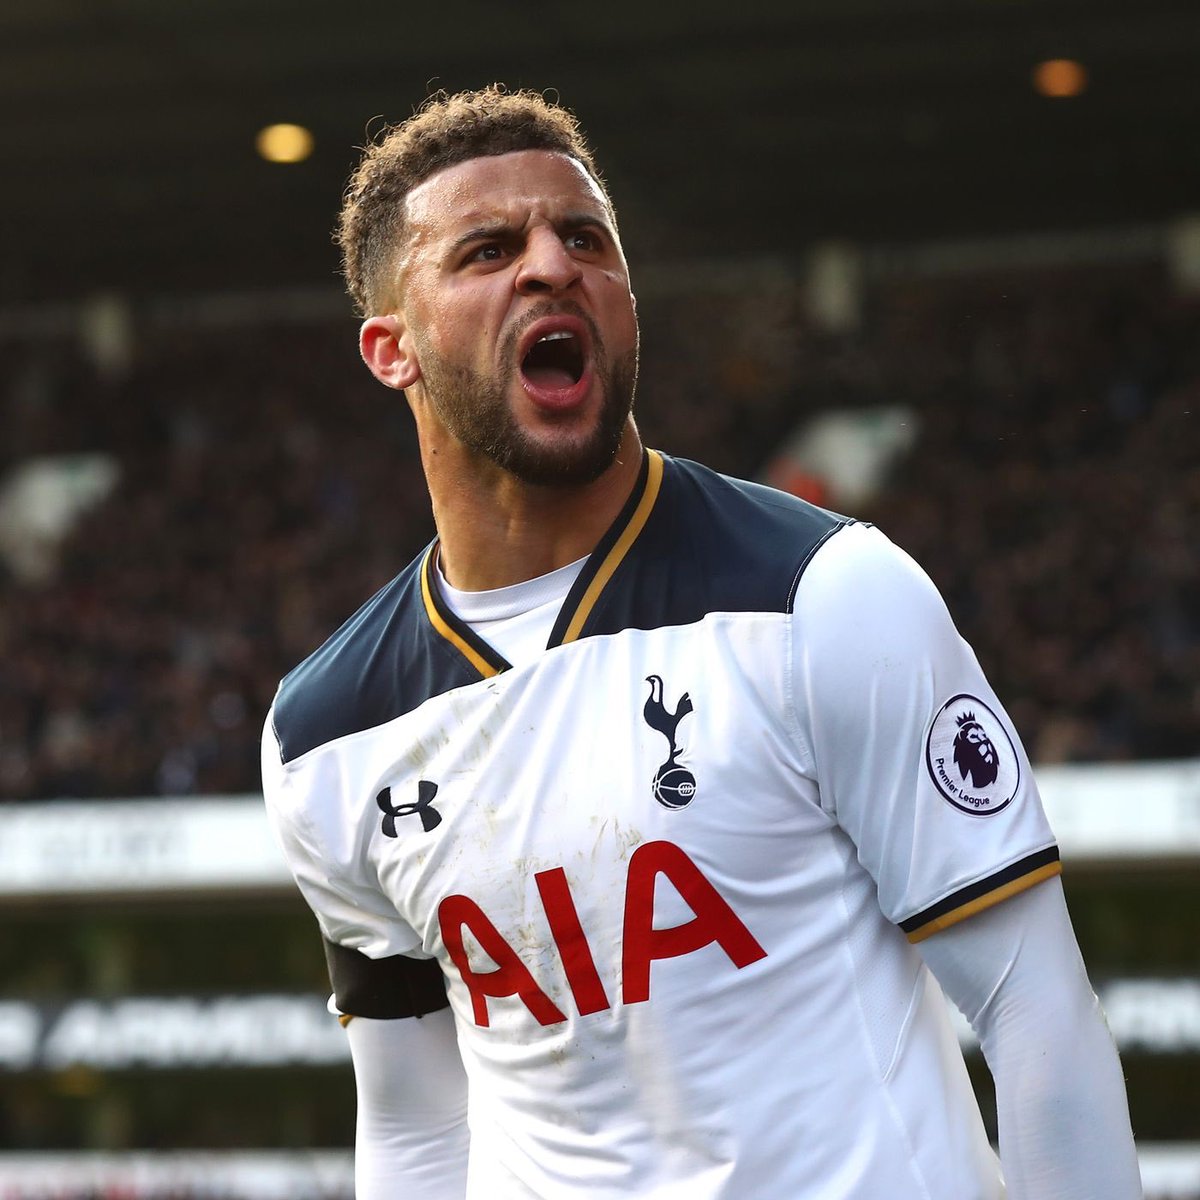 Let’s start with the teams RB situation:Kyle Walker sold in July 2017 for £47m.Serge Aurier bought in August 2017 for £22.5m.Kieran Trippier sold in July 2019 for £19m.KWP sold in July 2020 for £12m.Serge Aurier likely to be sold this t.window for £18m.